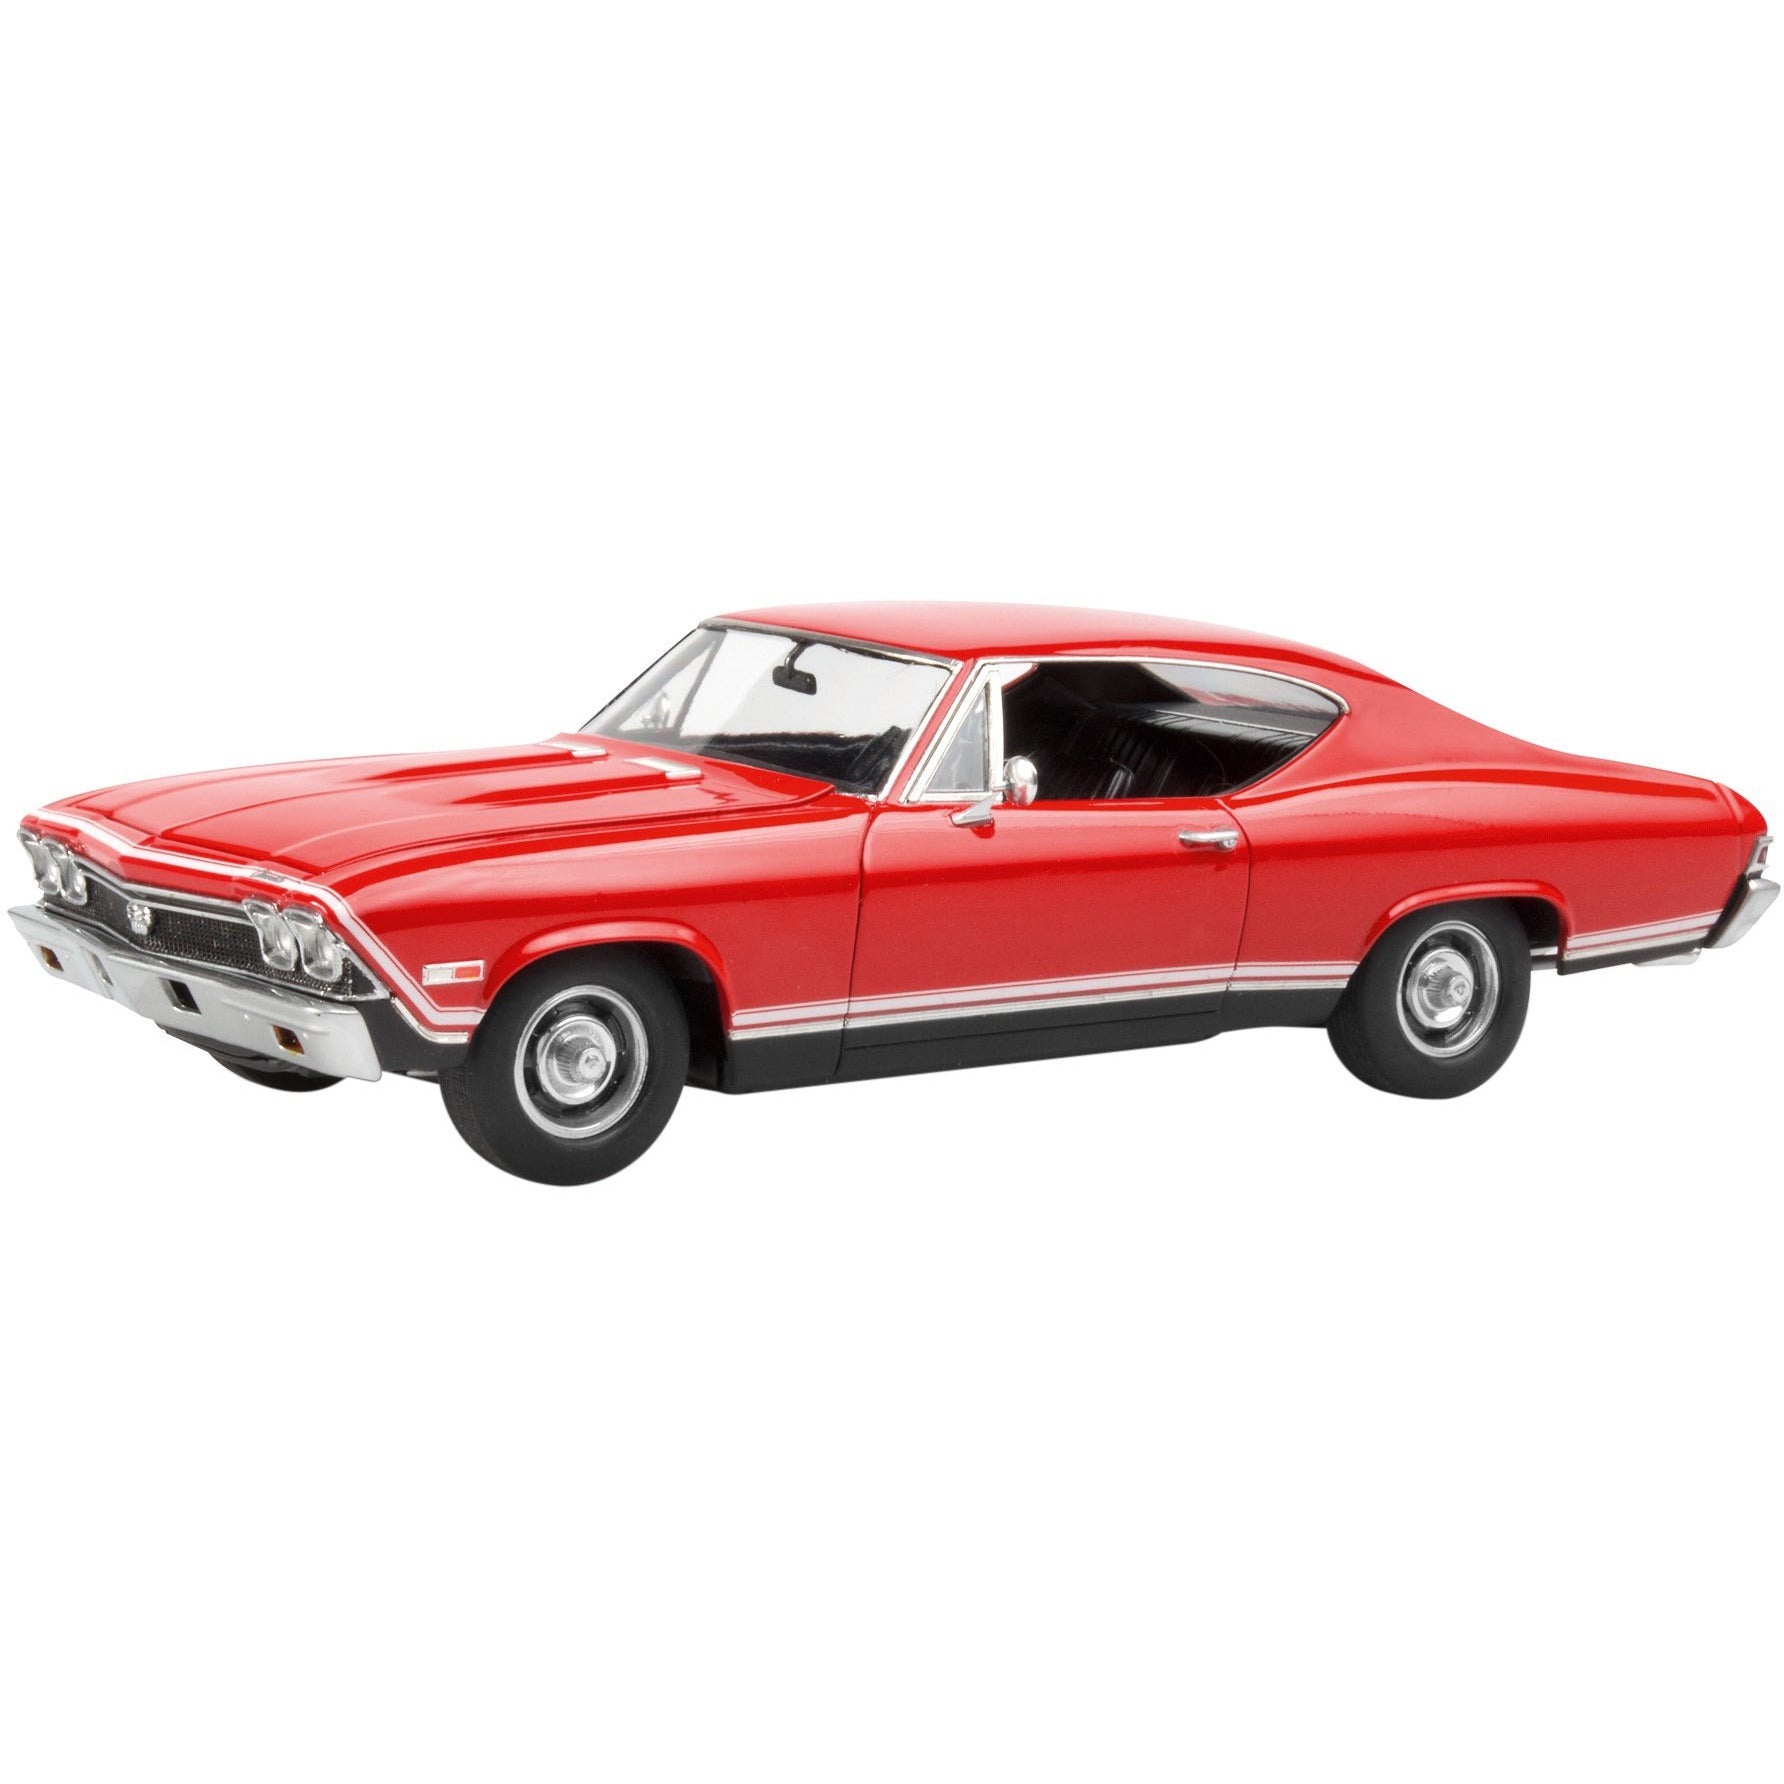 1968 Chevelle SS 396 1/25 by Revell